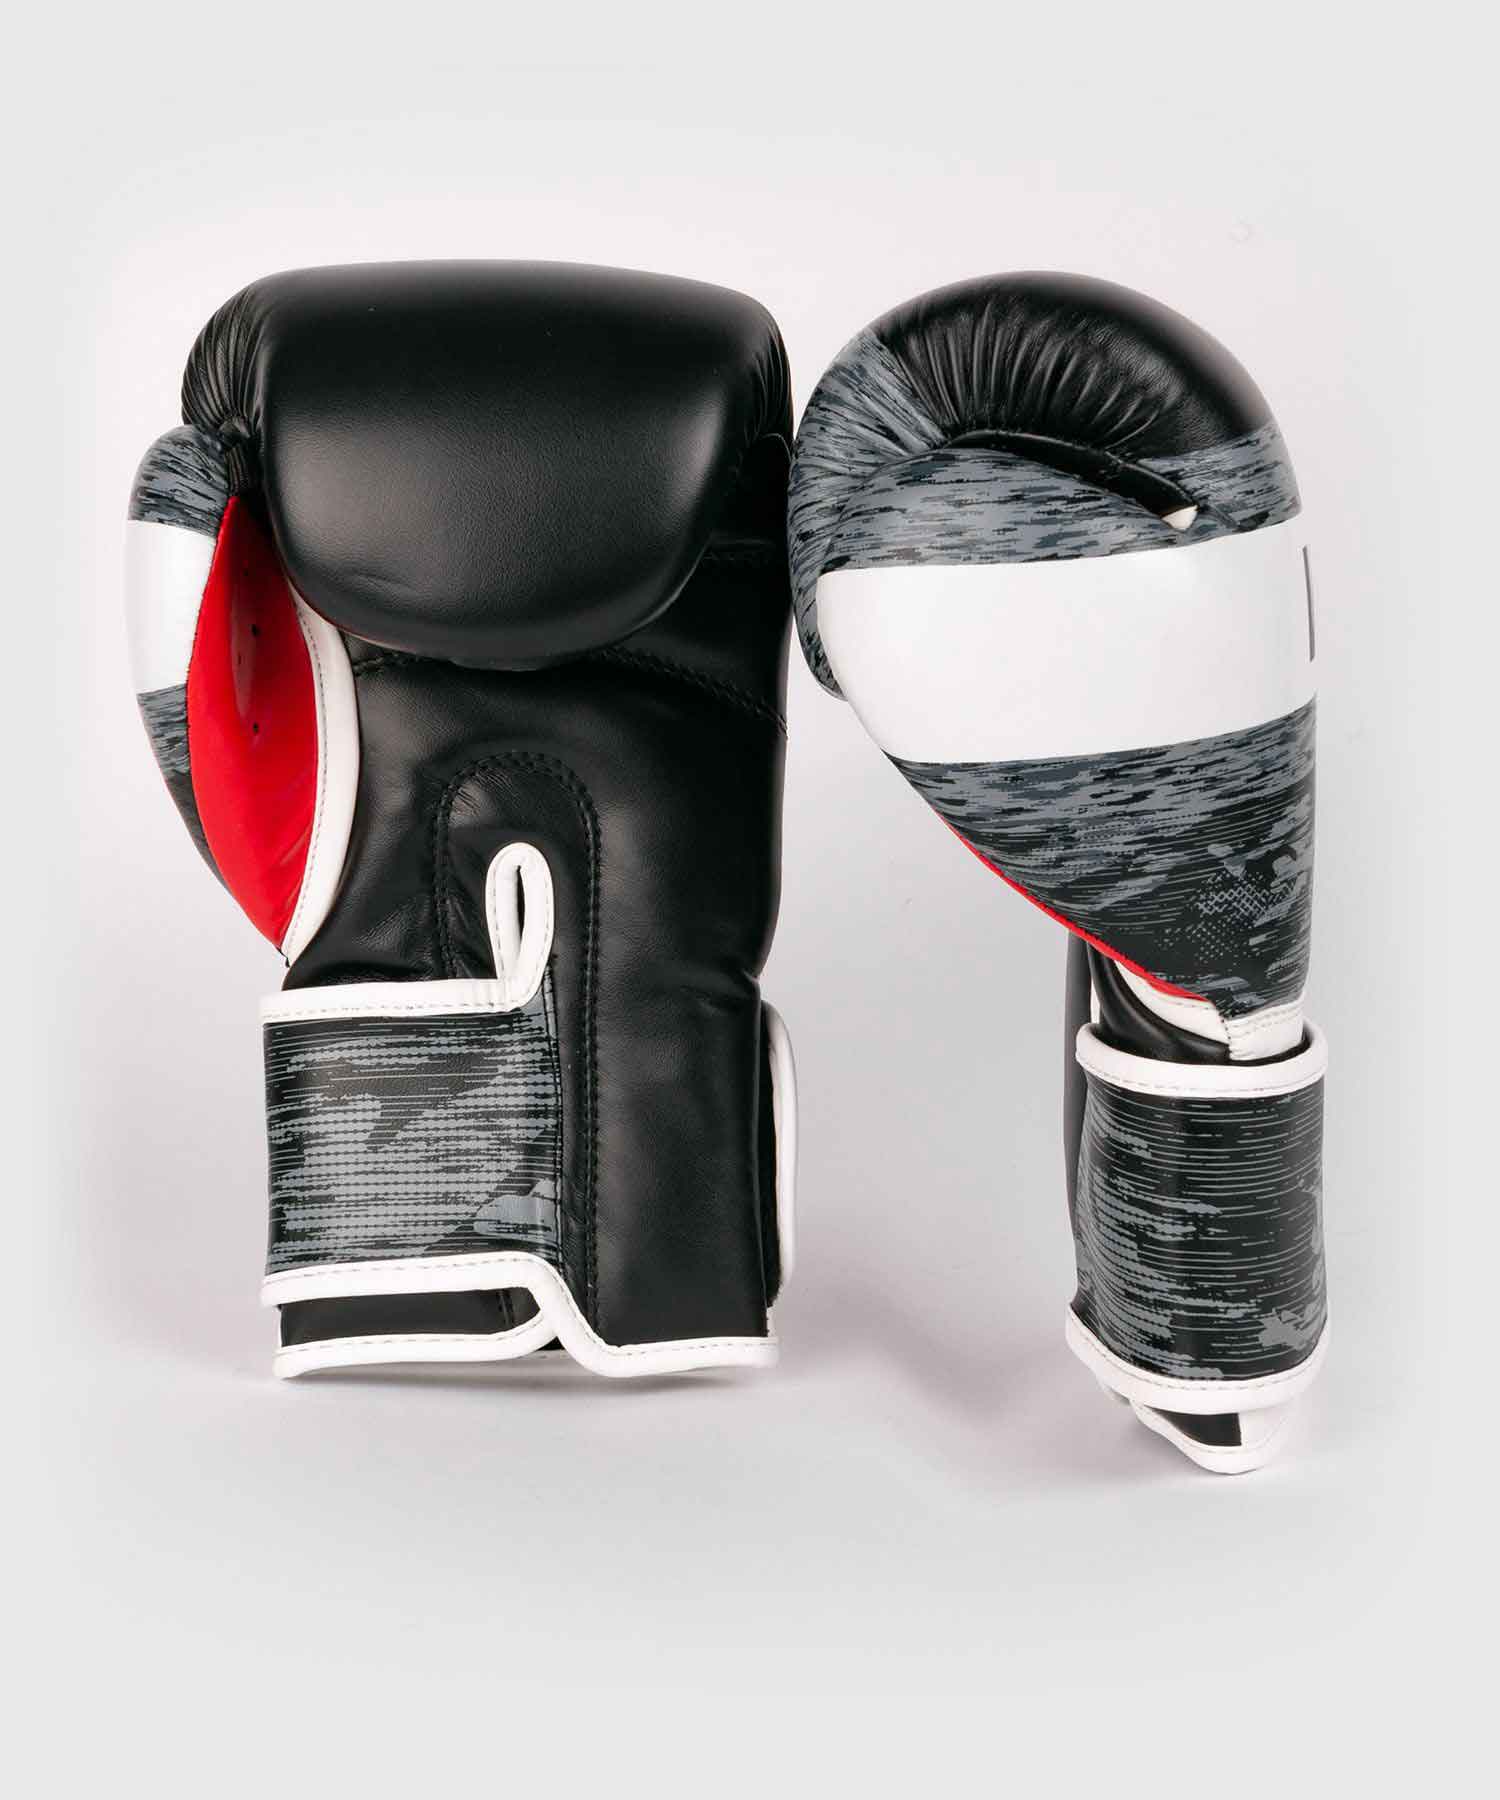 VENUM KIDS／キッズ　グローブ　　BANDIT BOXING GLOVES FOR KIDS／バンディット ボクシンググローブ キッズ